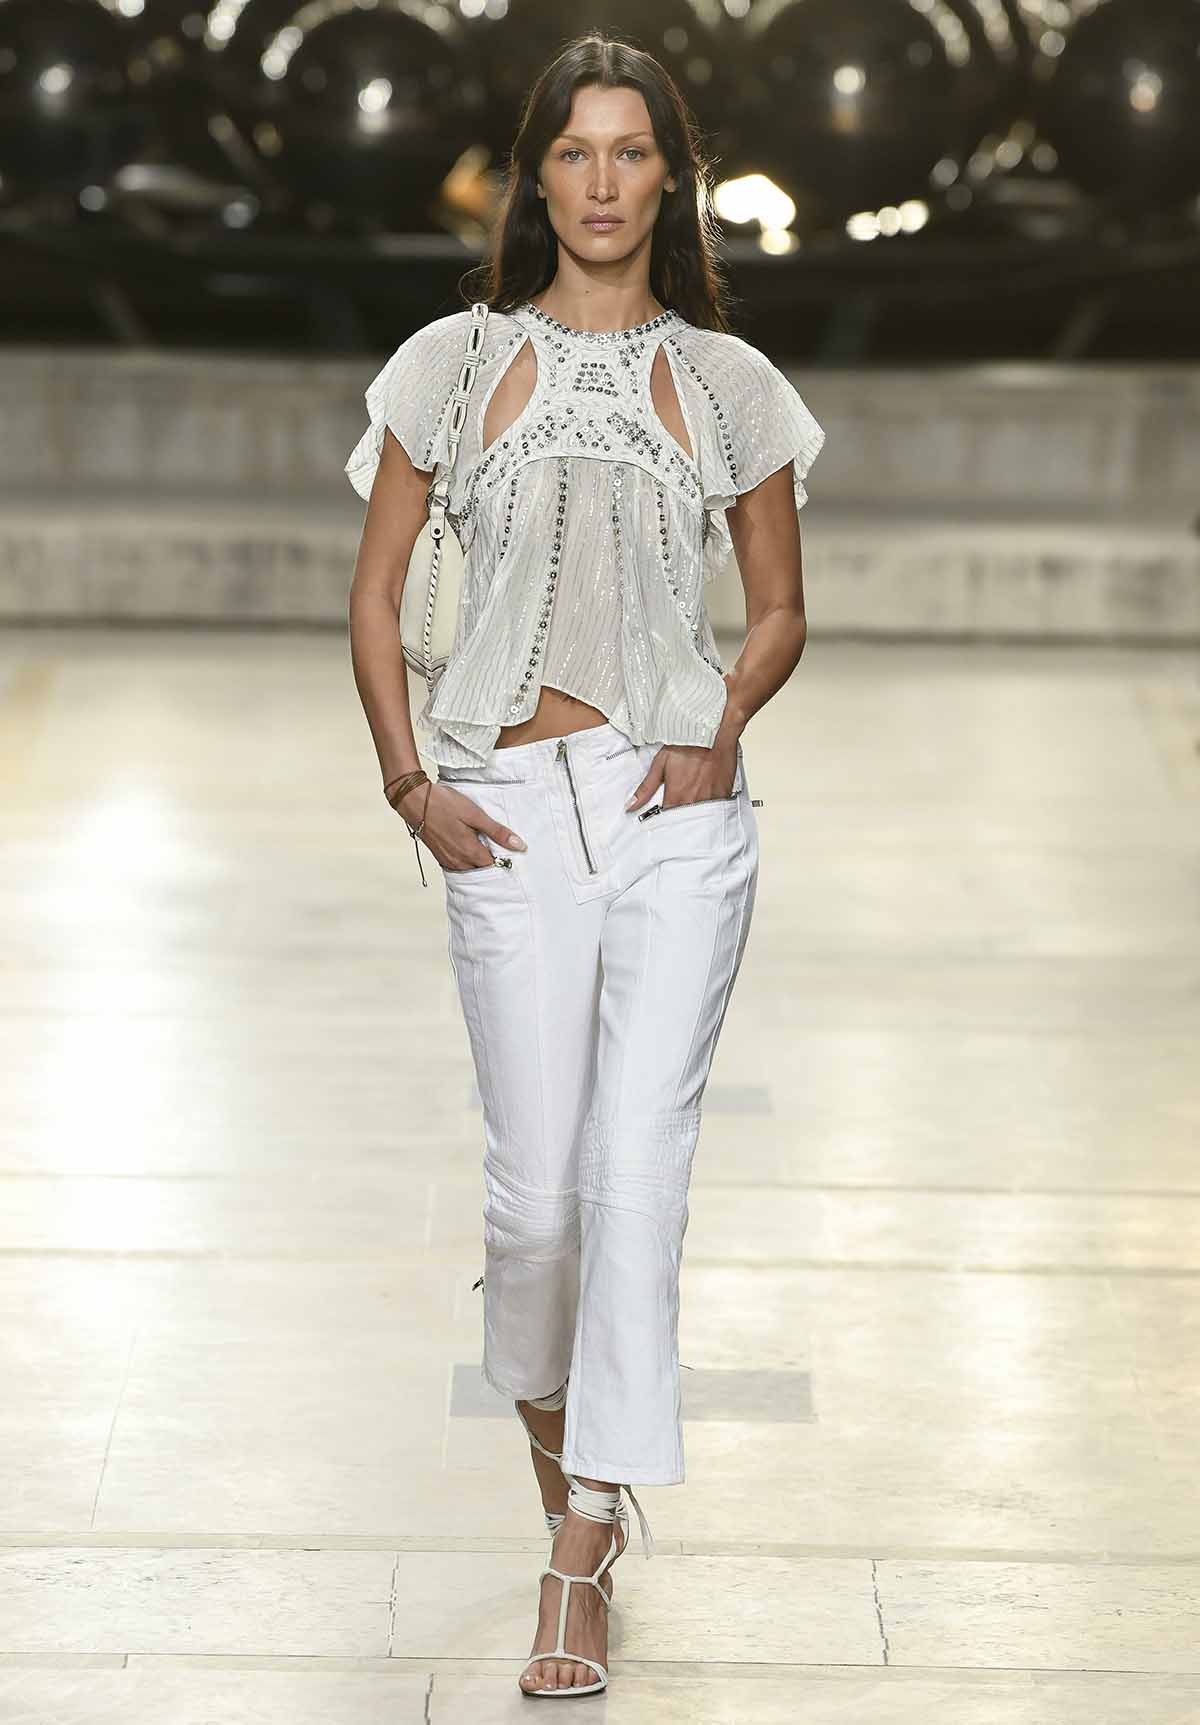 Bella Hadid walks for Isabel Marant in a white cutout top with silver sequins and white pants